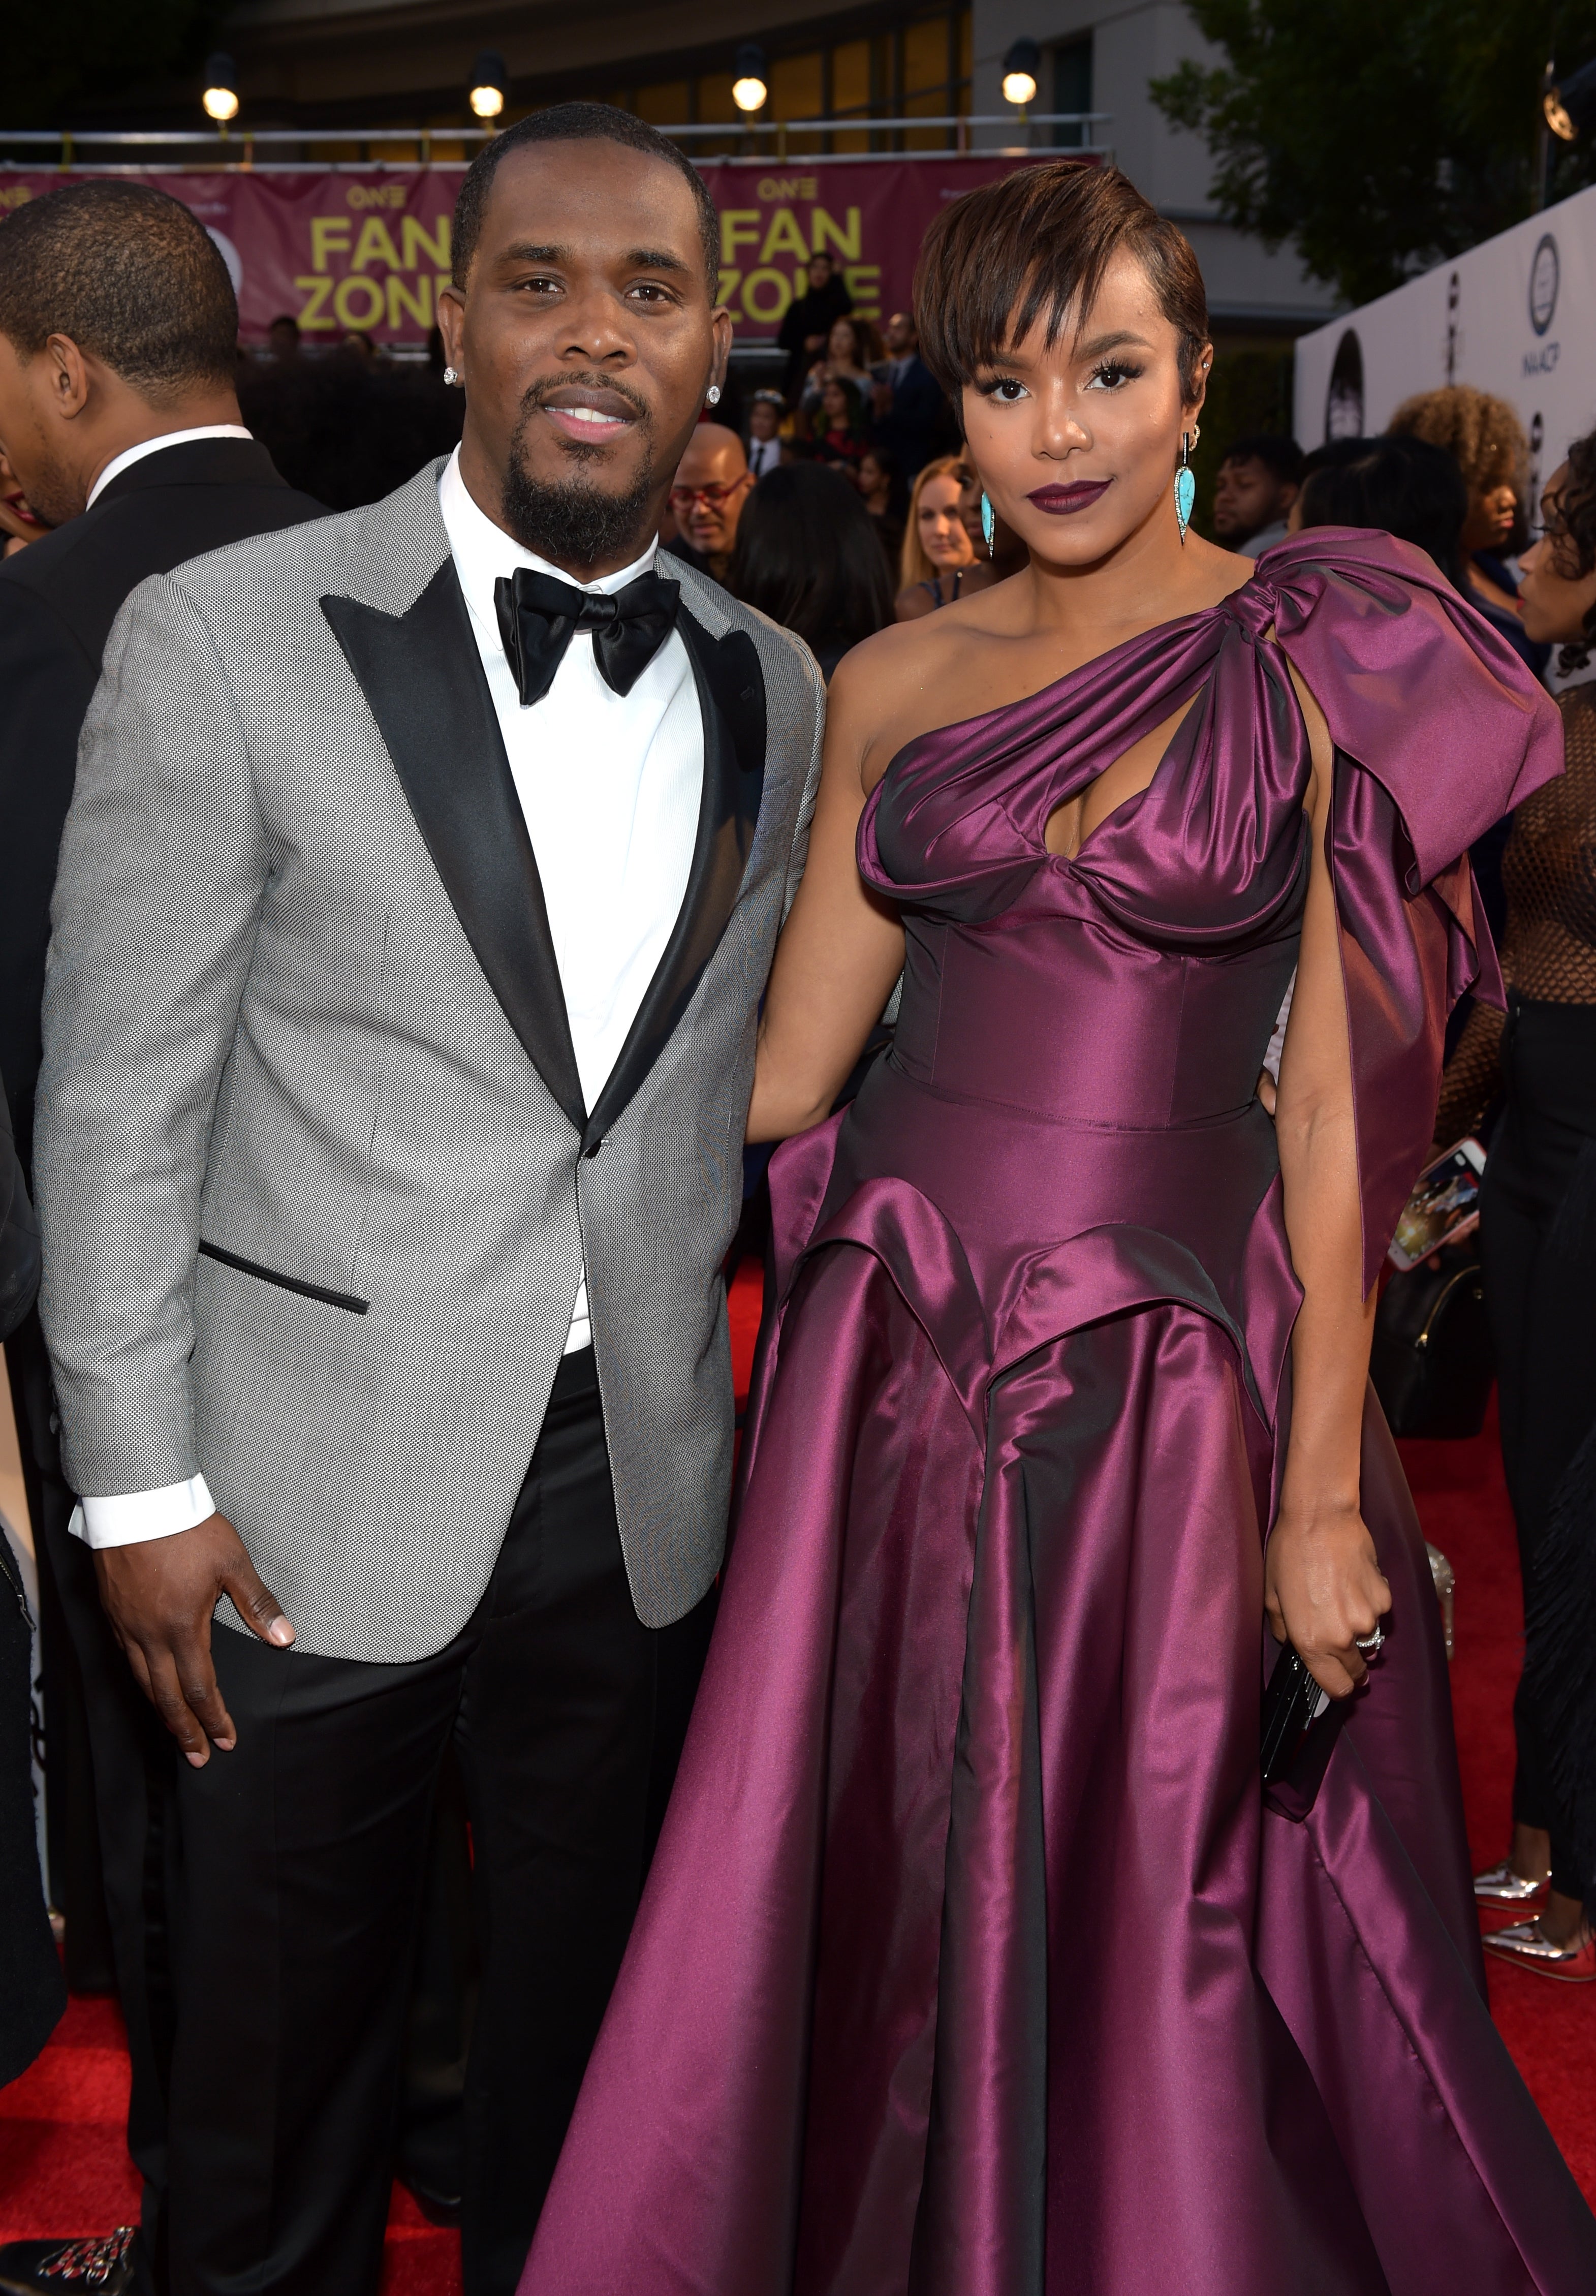 LeToya Luckett And Her New Husband Make First Red Carpet Appearance As Newlyweds
